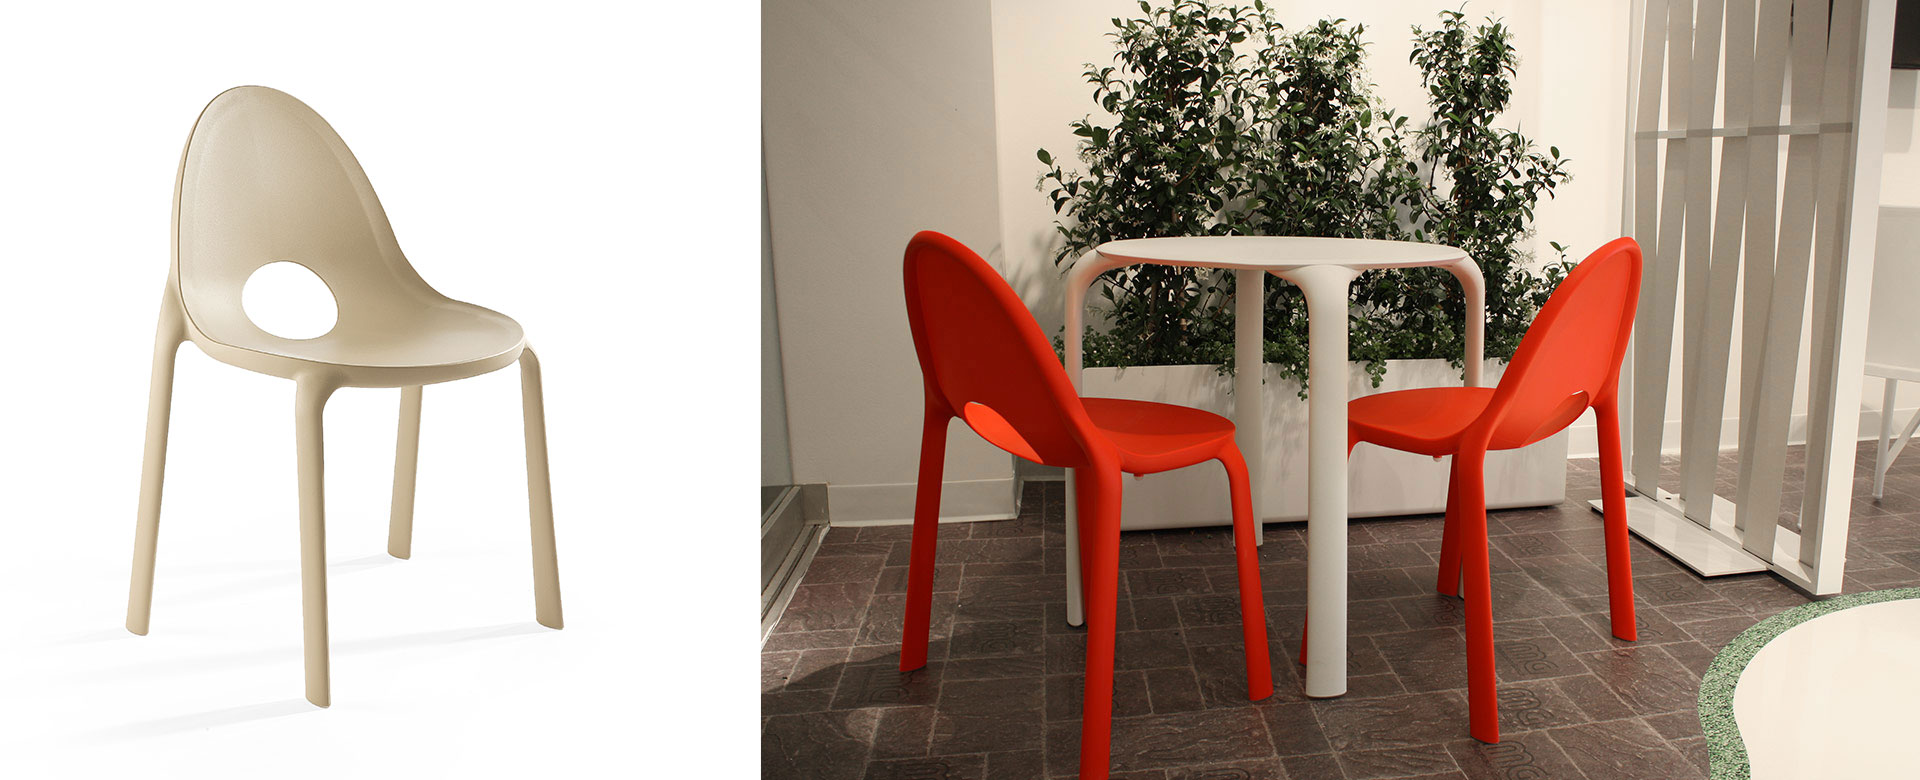 STILLA Outdoor Chairs & Tables